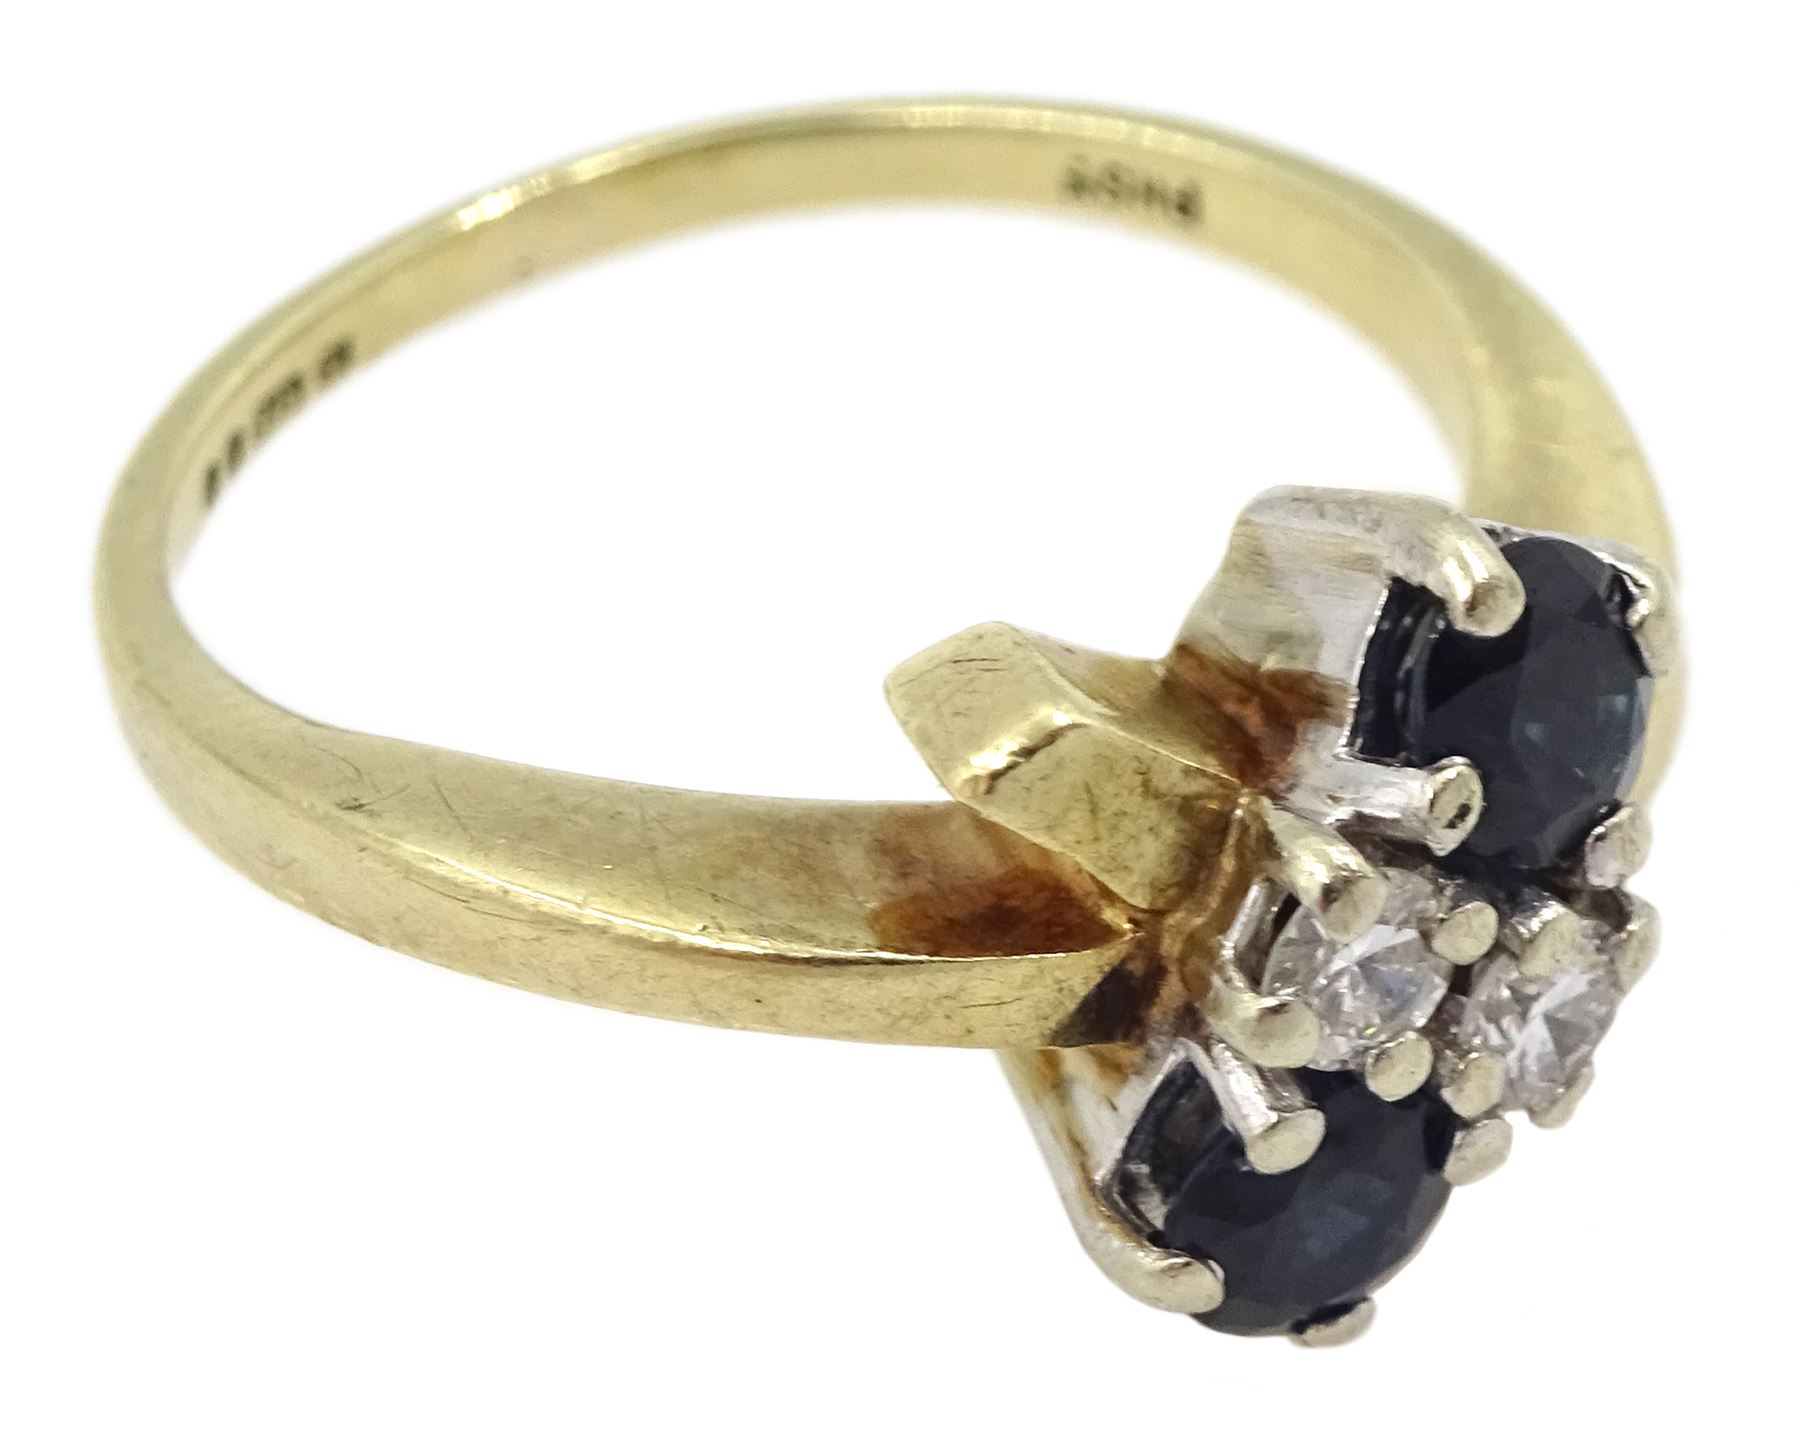 Gold four stone round brilliant cut diamond and sapphire ring - Image 3 of 4